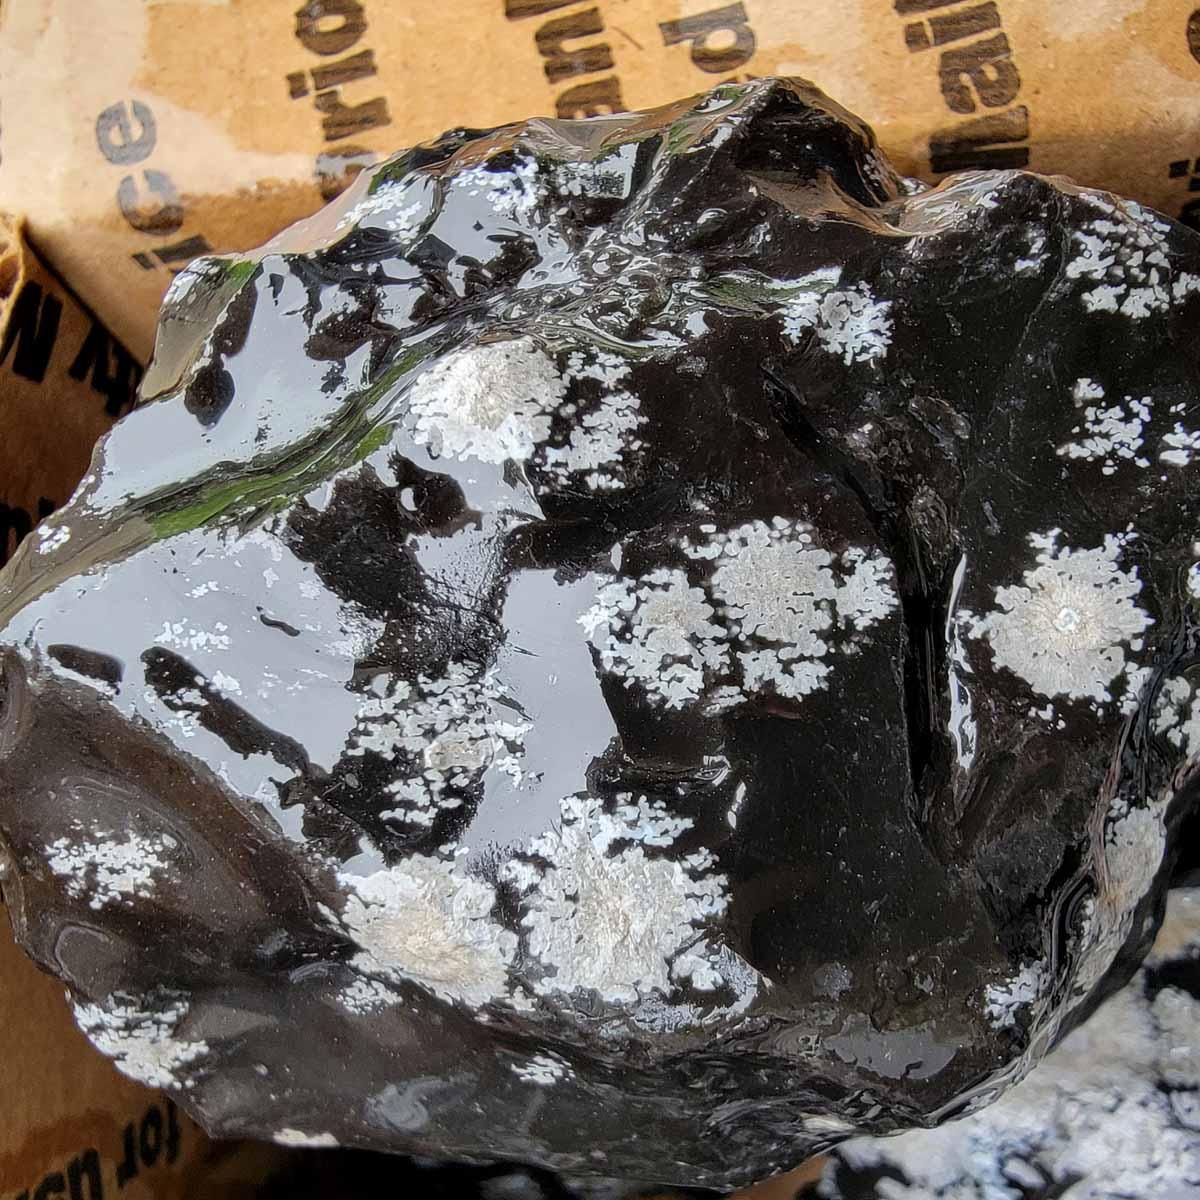 Snowflake Obsidian Rough Flatrate! - LapidaryCentral